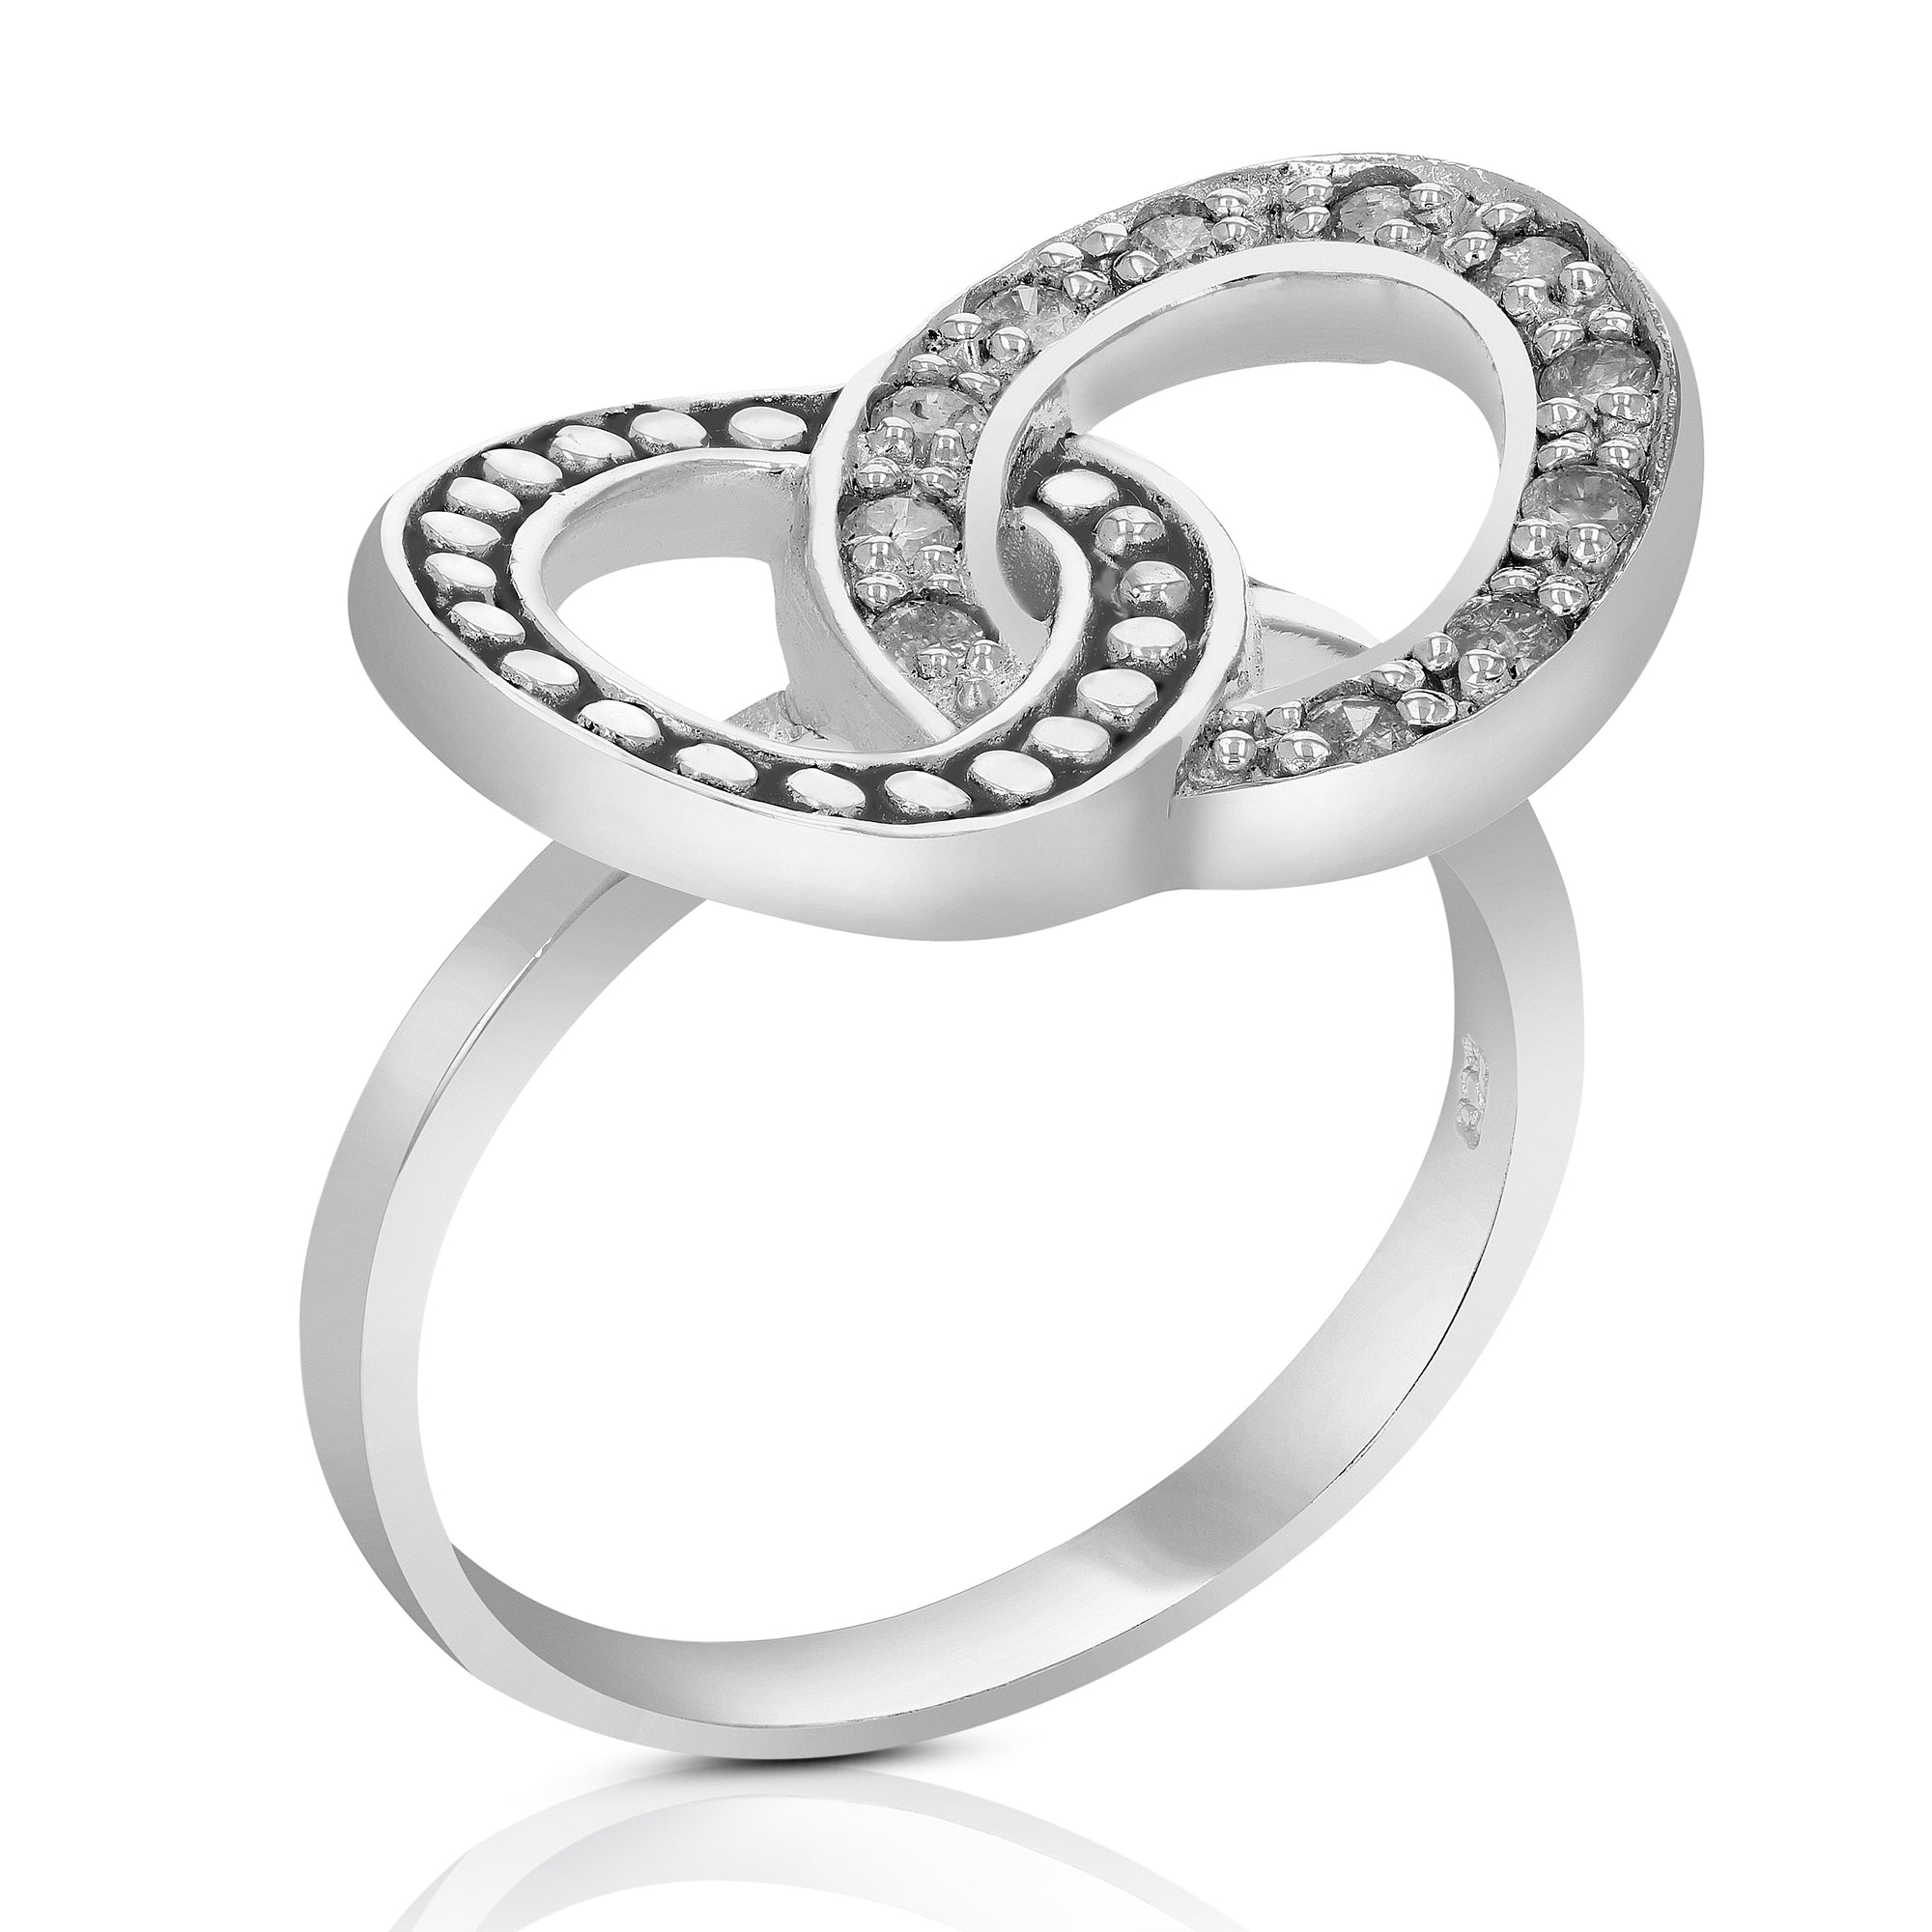 1/4 cttw Diamond Ring in .925 Sterling Silver with Rhodium Round Prong Set